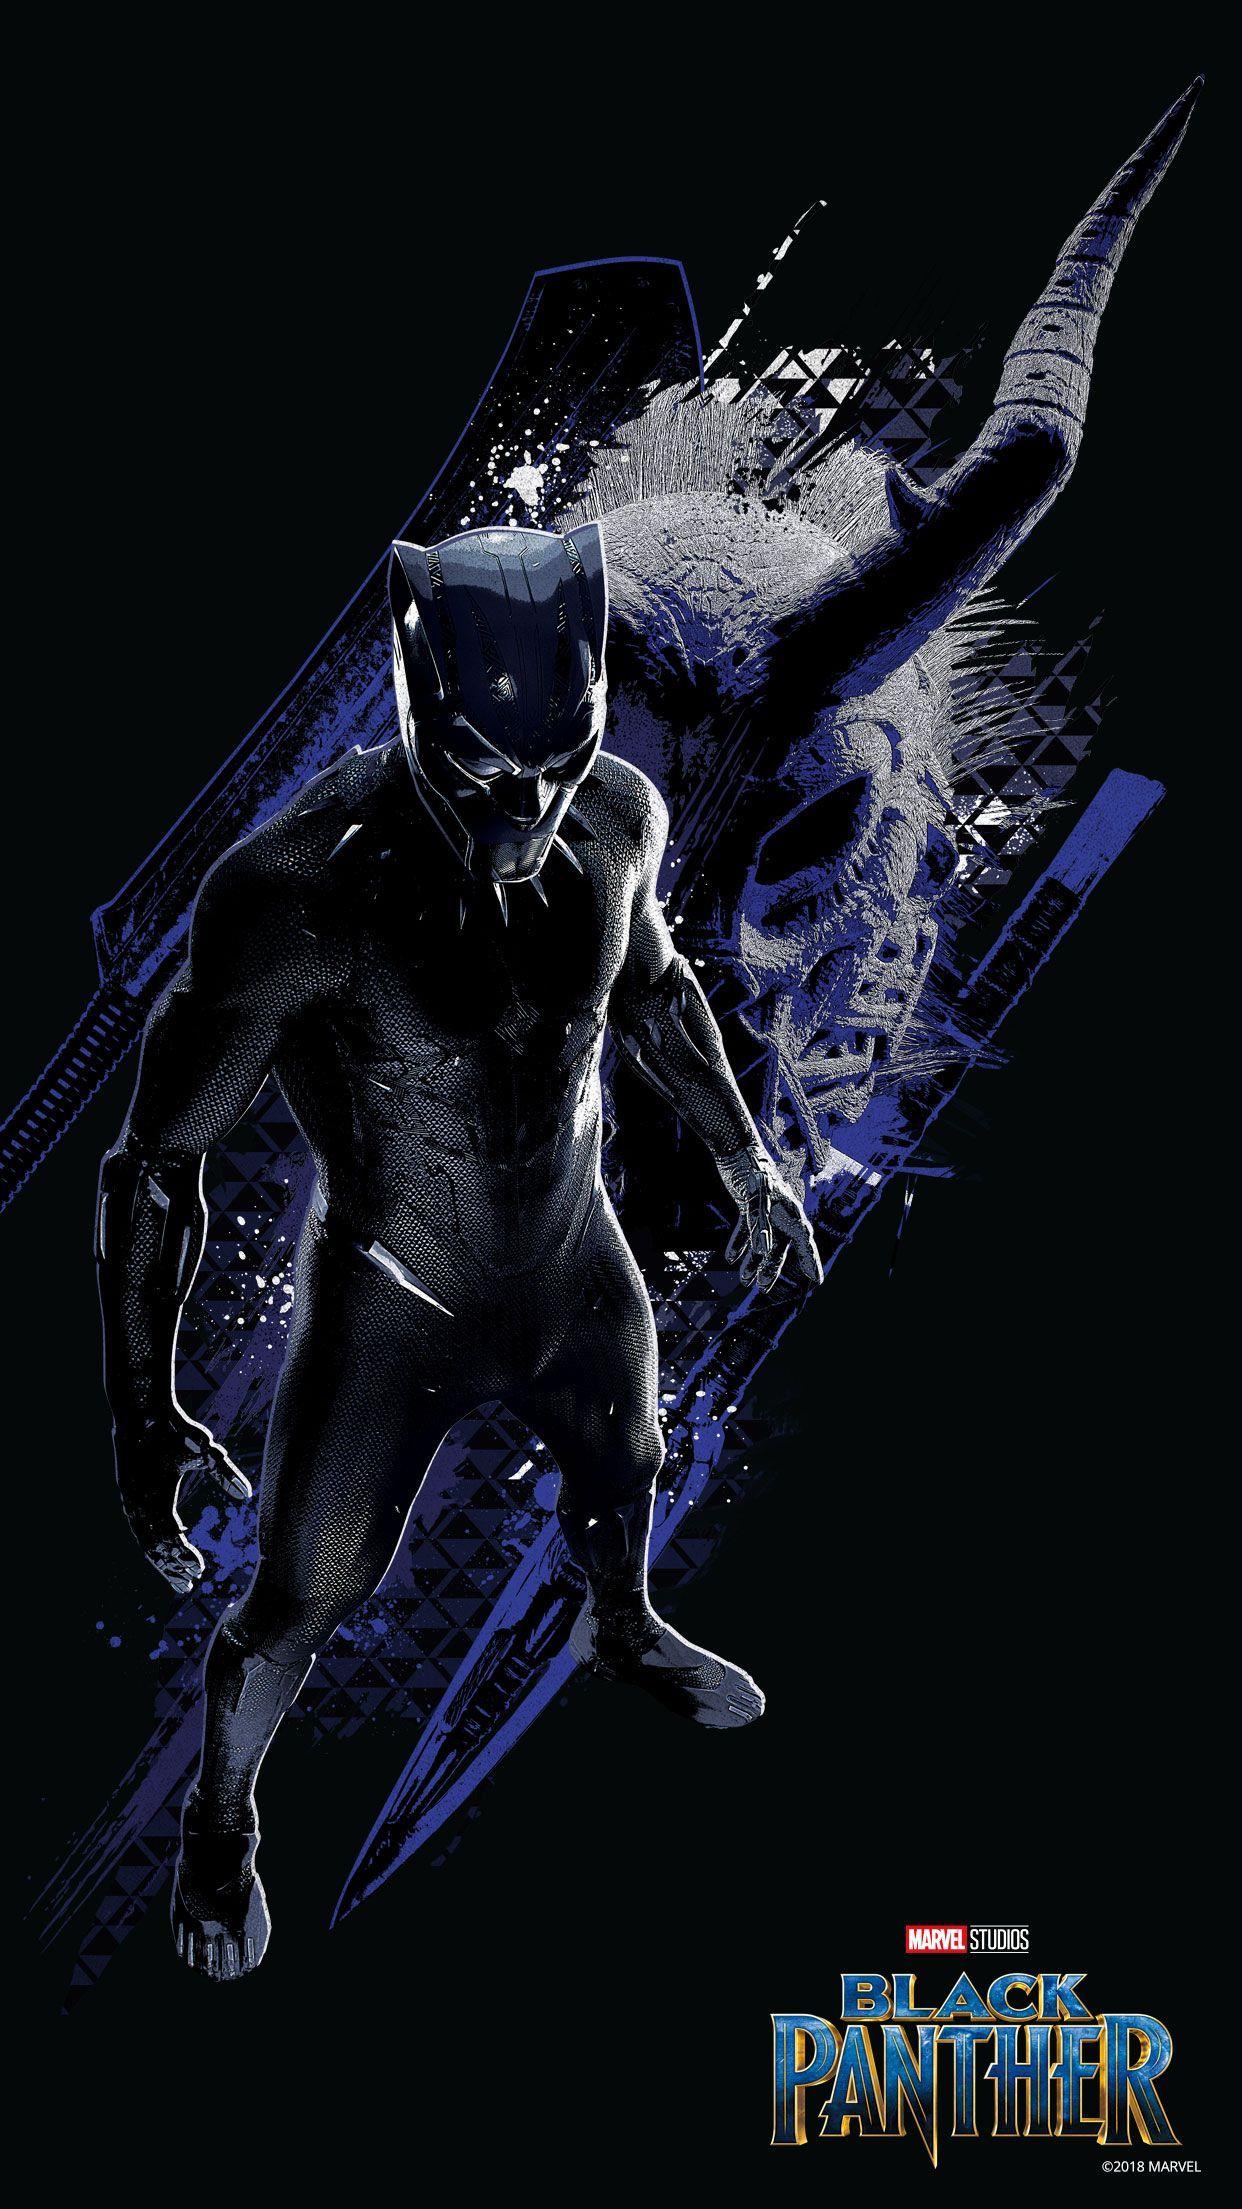 Keep it slick with these Black Panther mobile wallpaper. Marvel